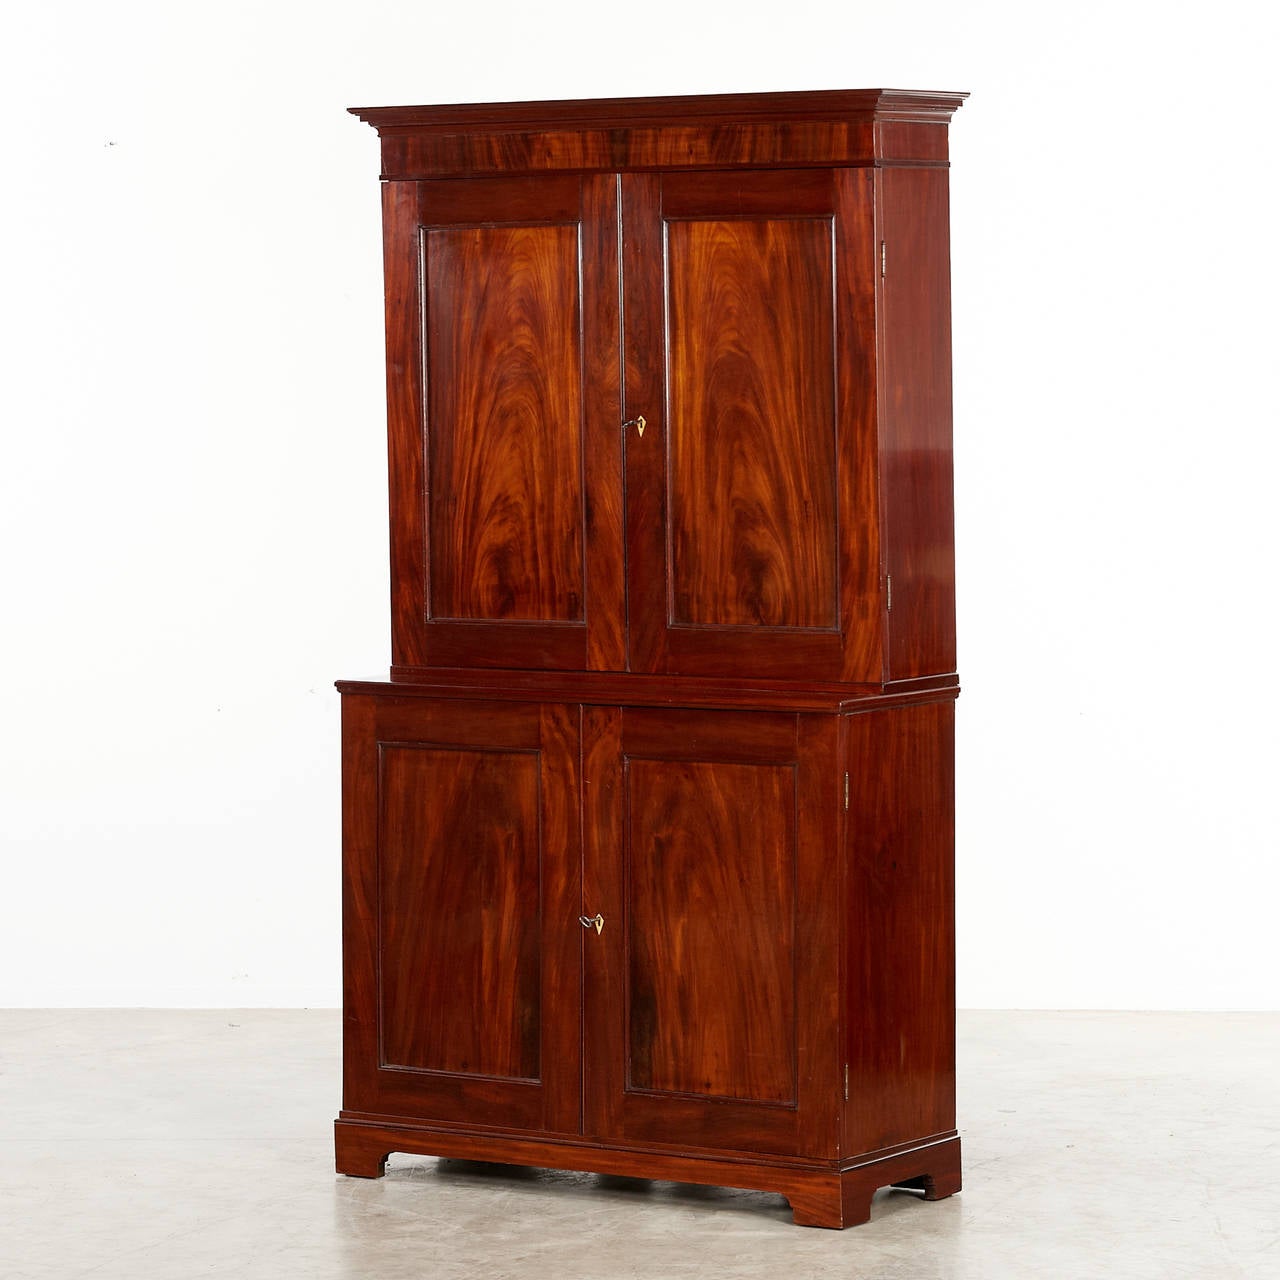 Elegant empire cabinet separated in two parts with each two doors and inside with adjustable shelves. Veneered with flamed Cuban mahogany. Denmark, circa 1810.